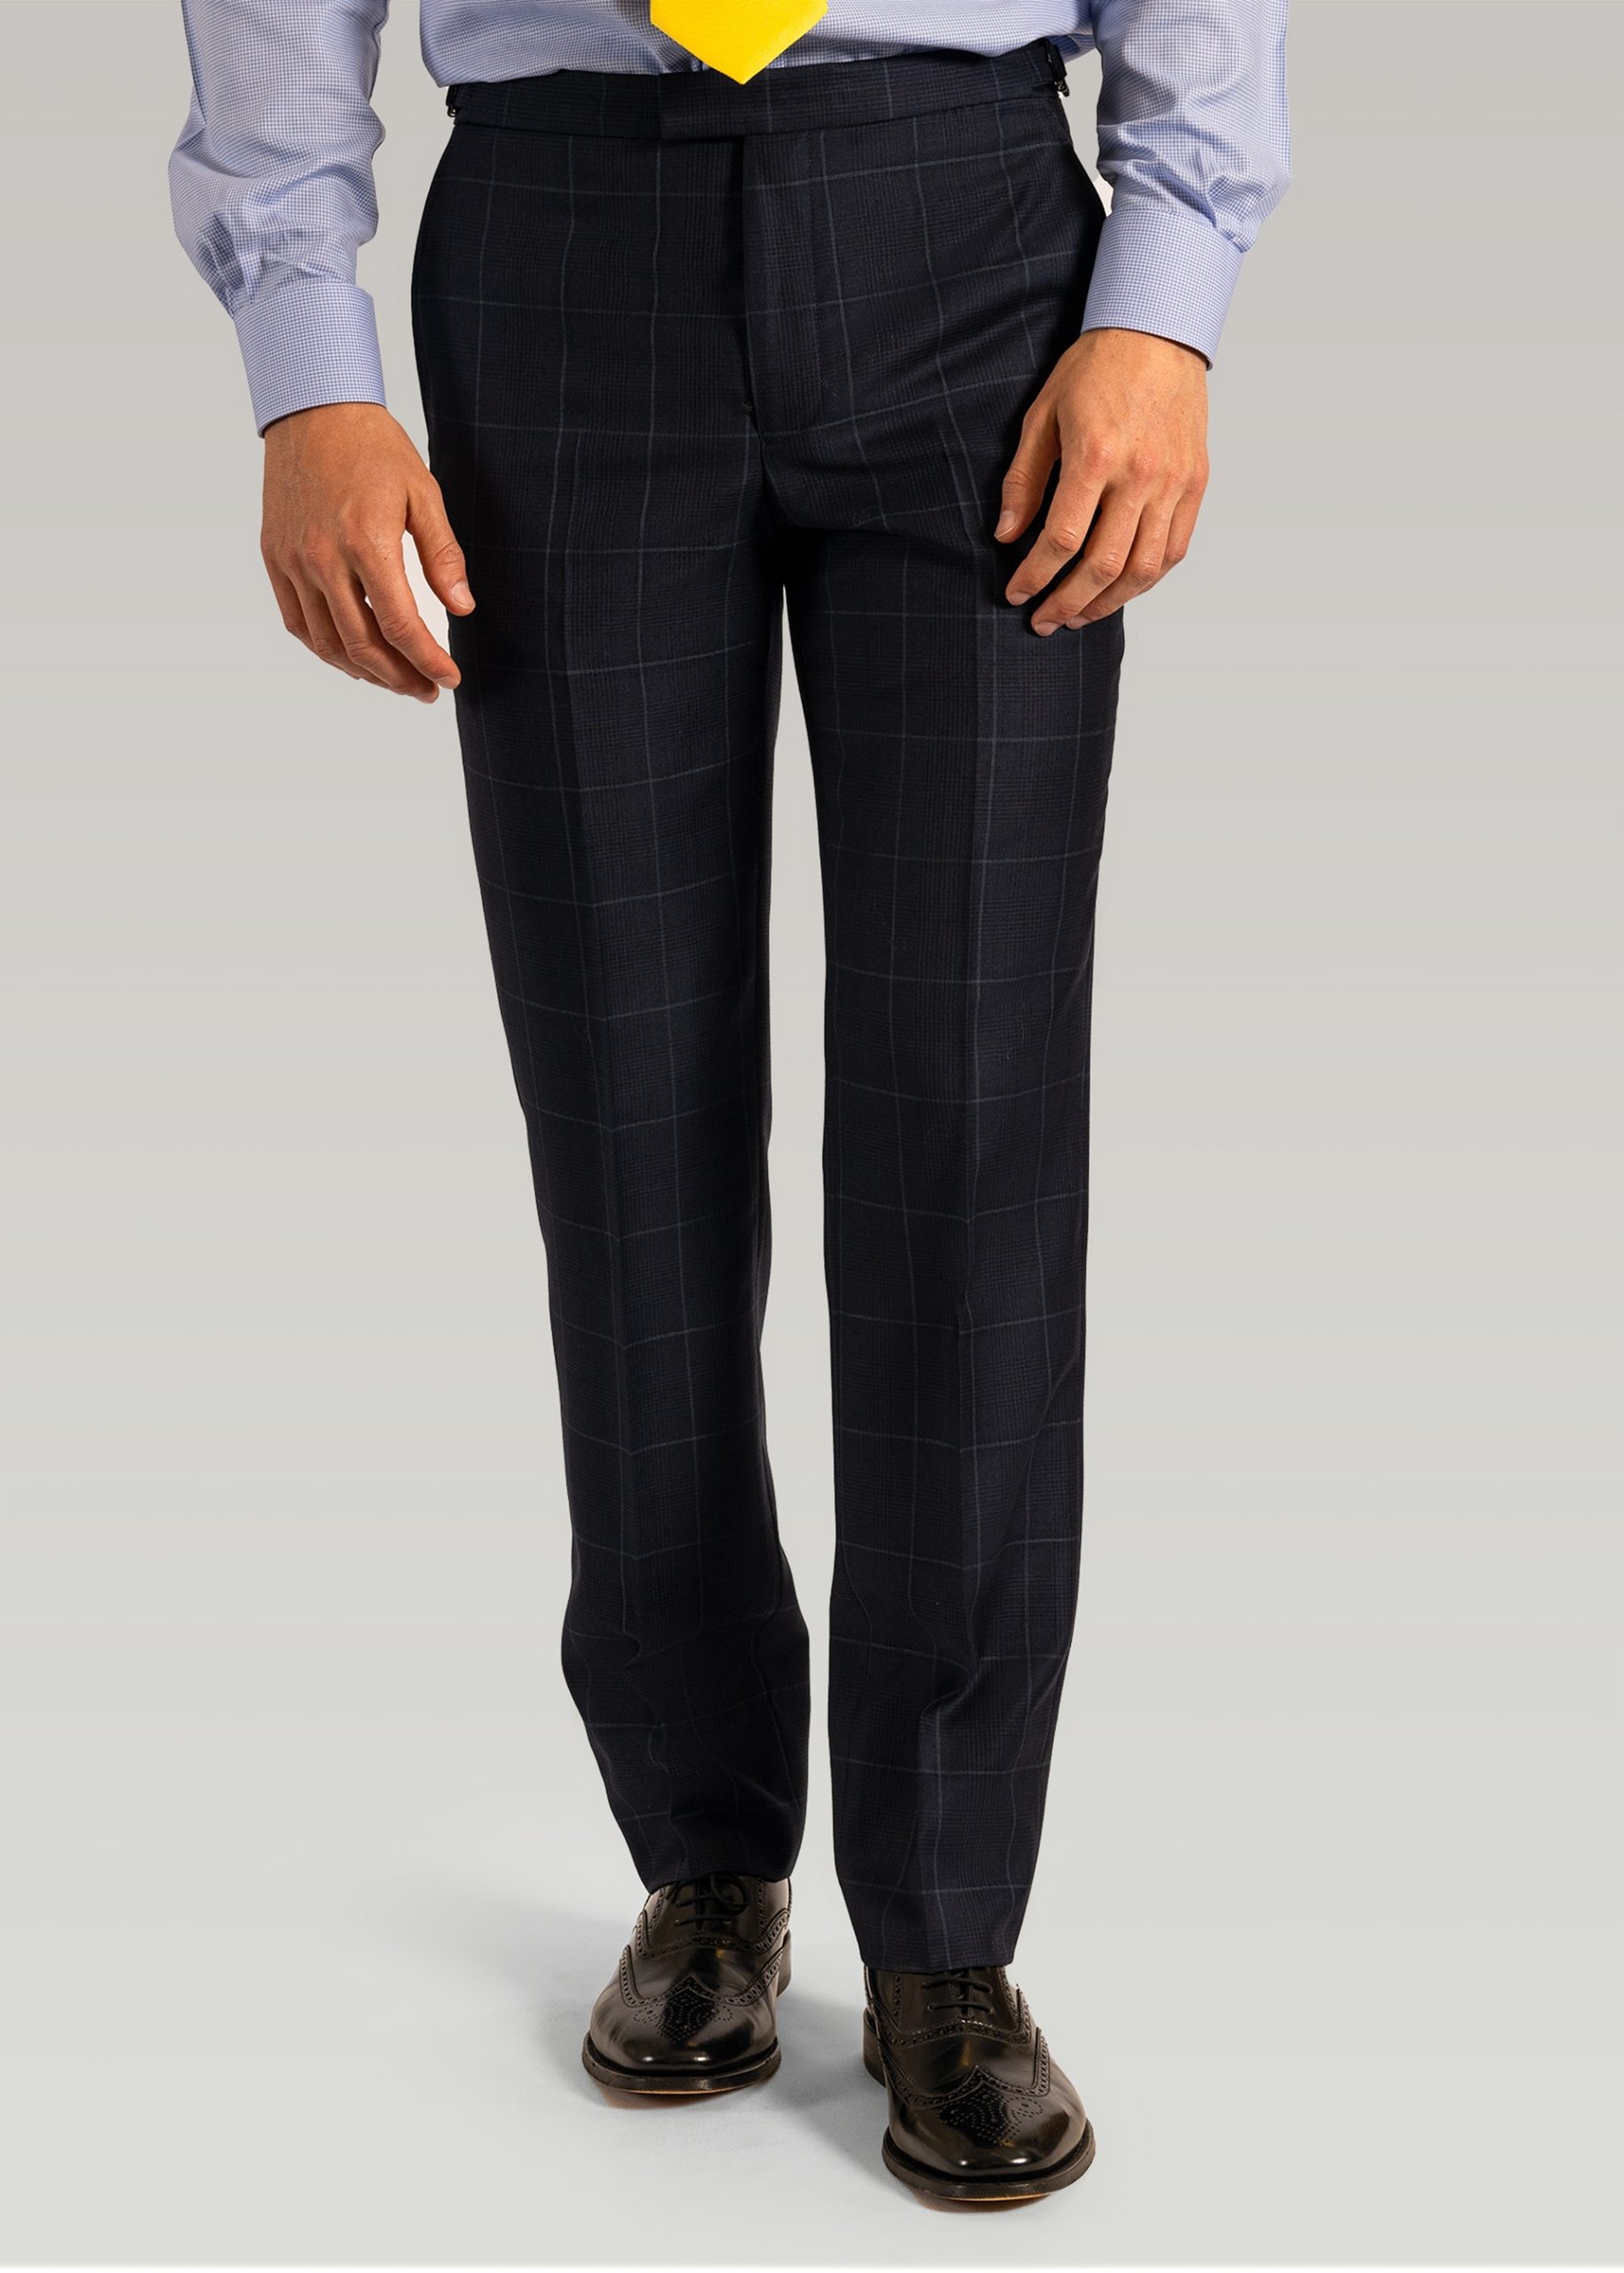 Roderick Charles navy tailored fit windowpane mens suit trousers